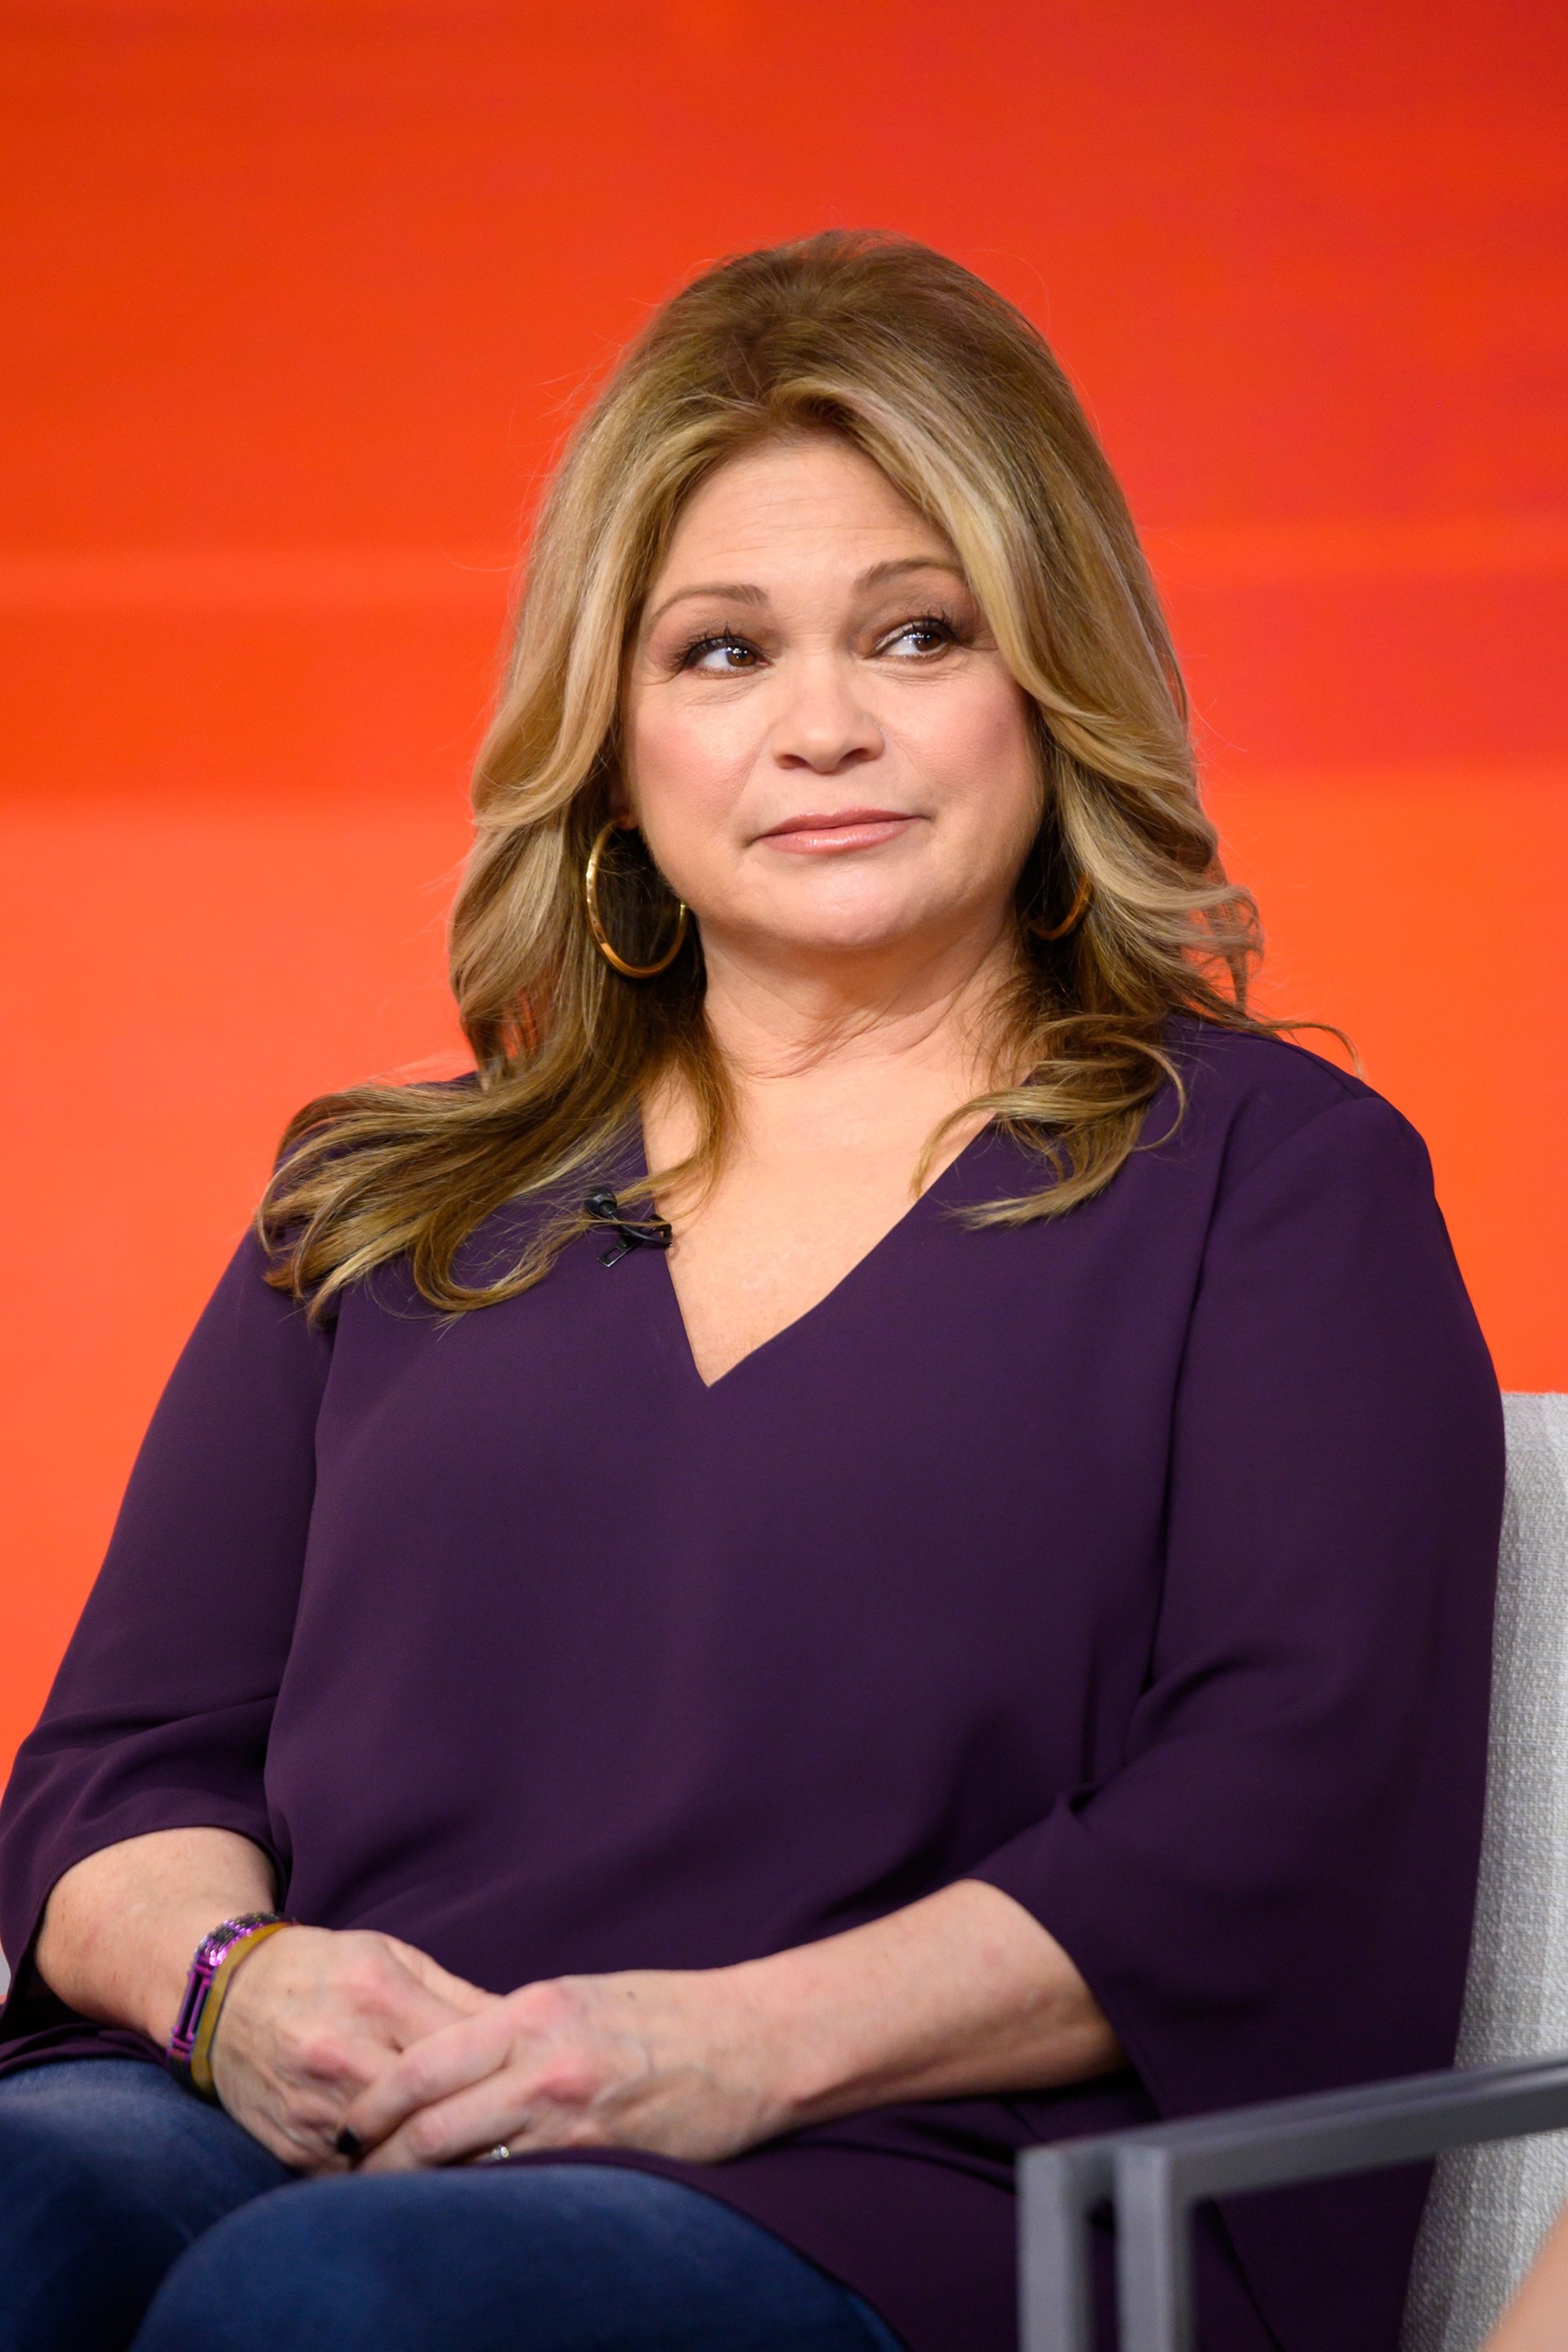 Valerie Bertinelli on Today on Friday, January 24, 2020 | Source: Getty Images